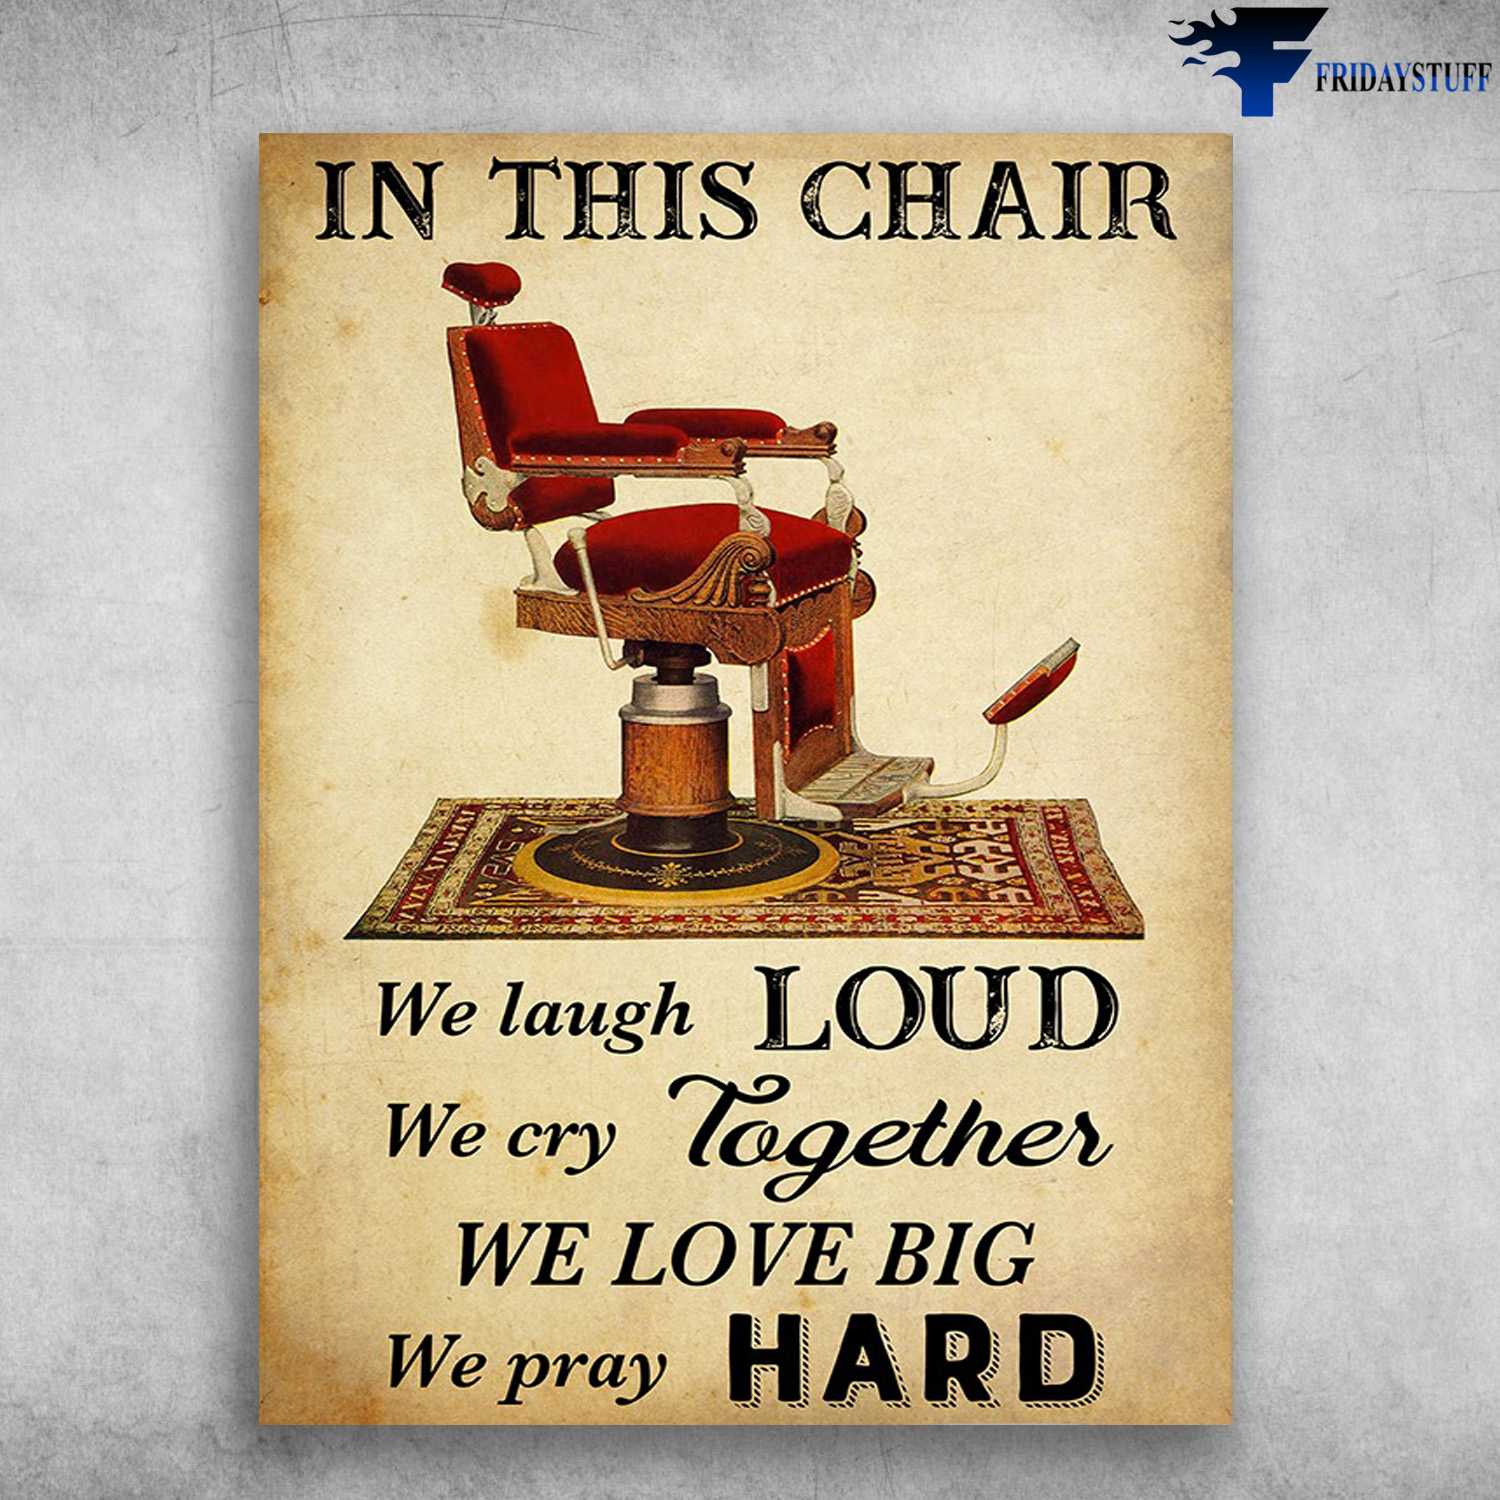 Barbershop Poster - In This Chair, We Laugh Loud, We Cry Together, We Love Big, We Pray Hard